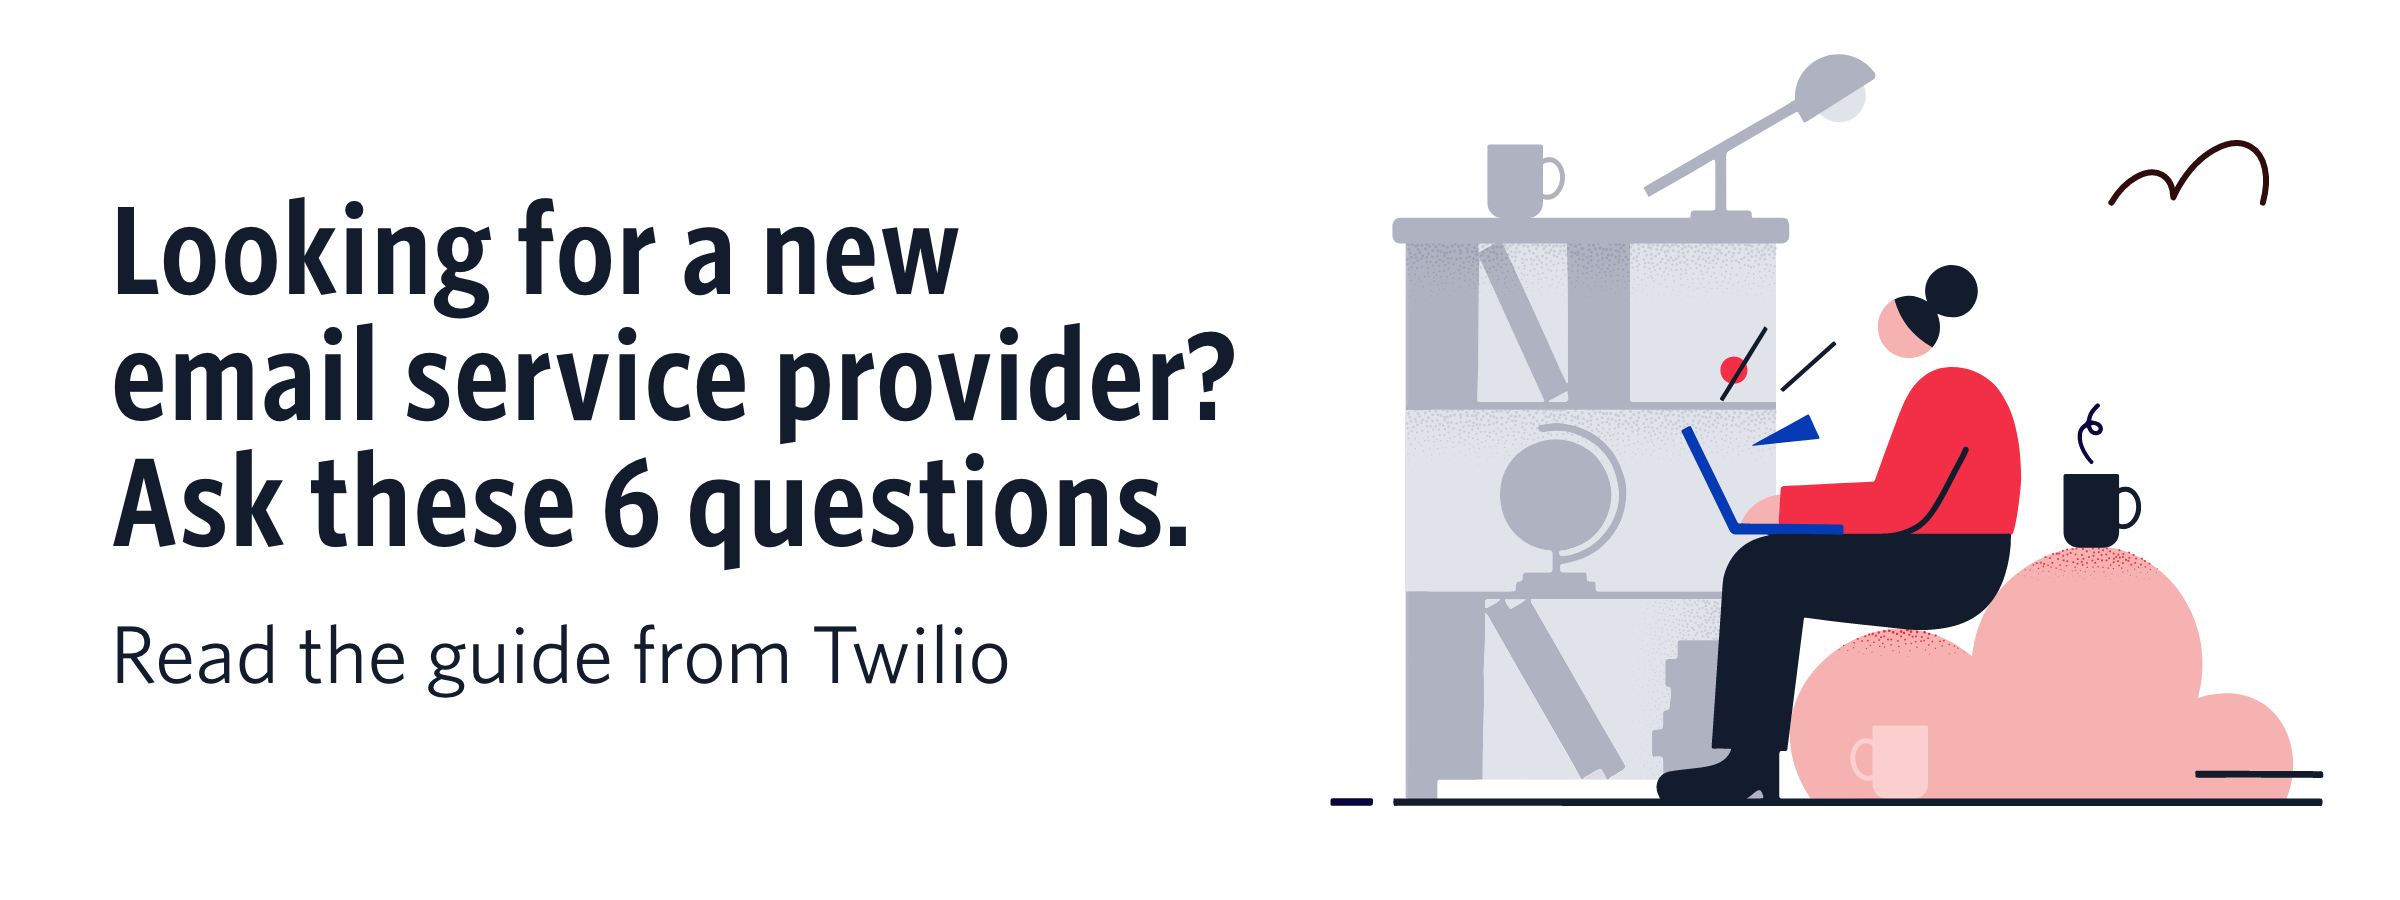 Looking for a new email service provider? Ask these 6 questions.